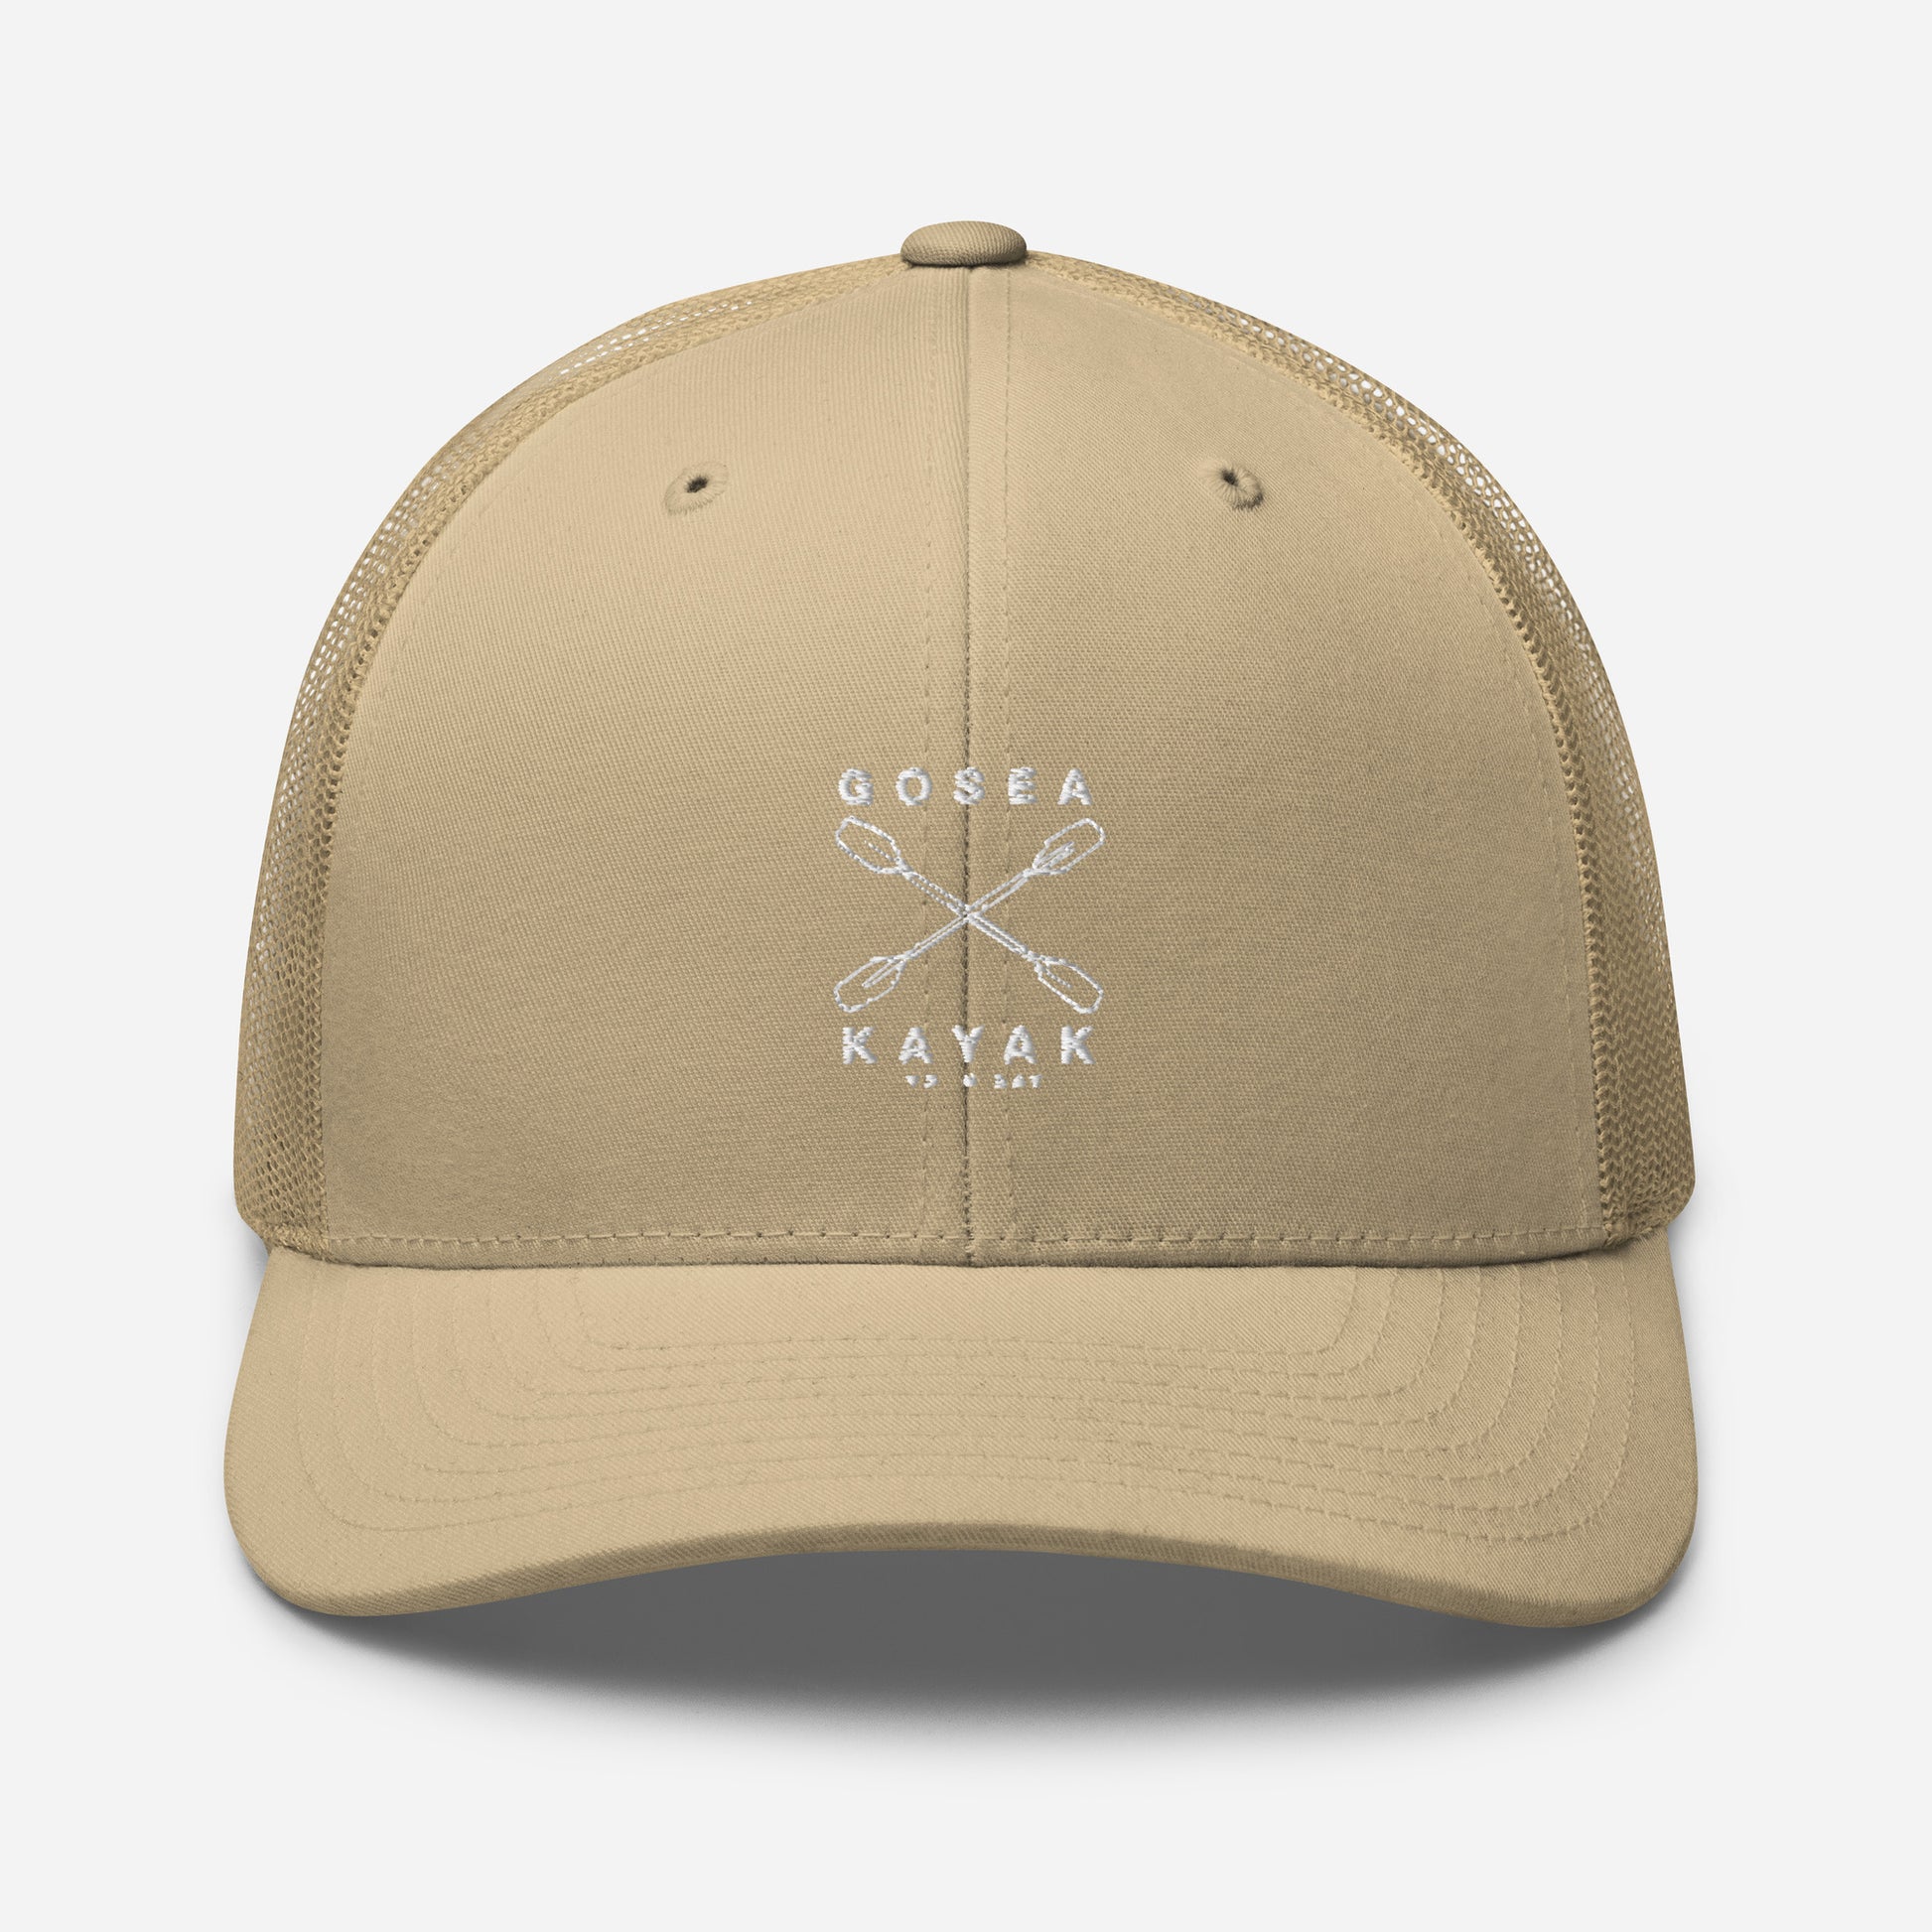  Trucker Cap - Khaki - Front view  - Crossed Paddles Go Sea Kayak Crew logo in white on front - Genuine Byron Bay Merchandise | Produced by Go Sea Kayak Byron Bay 